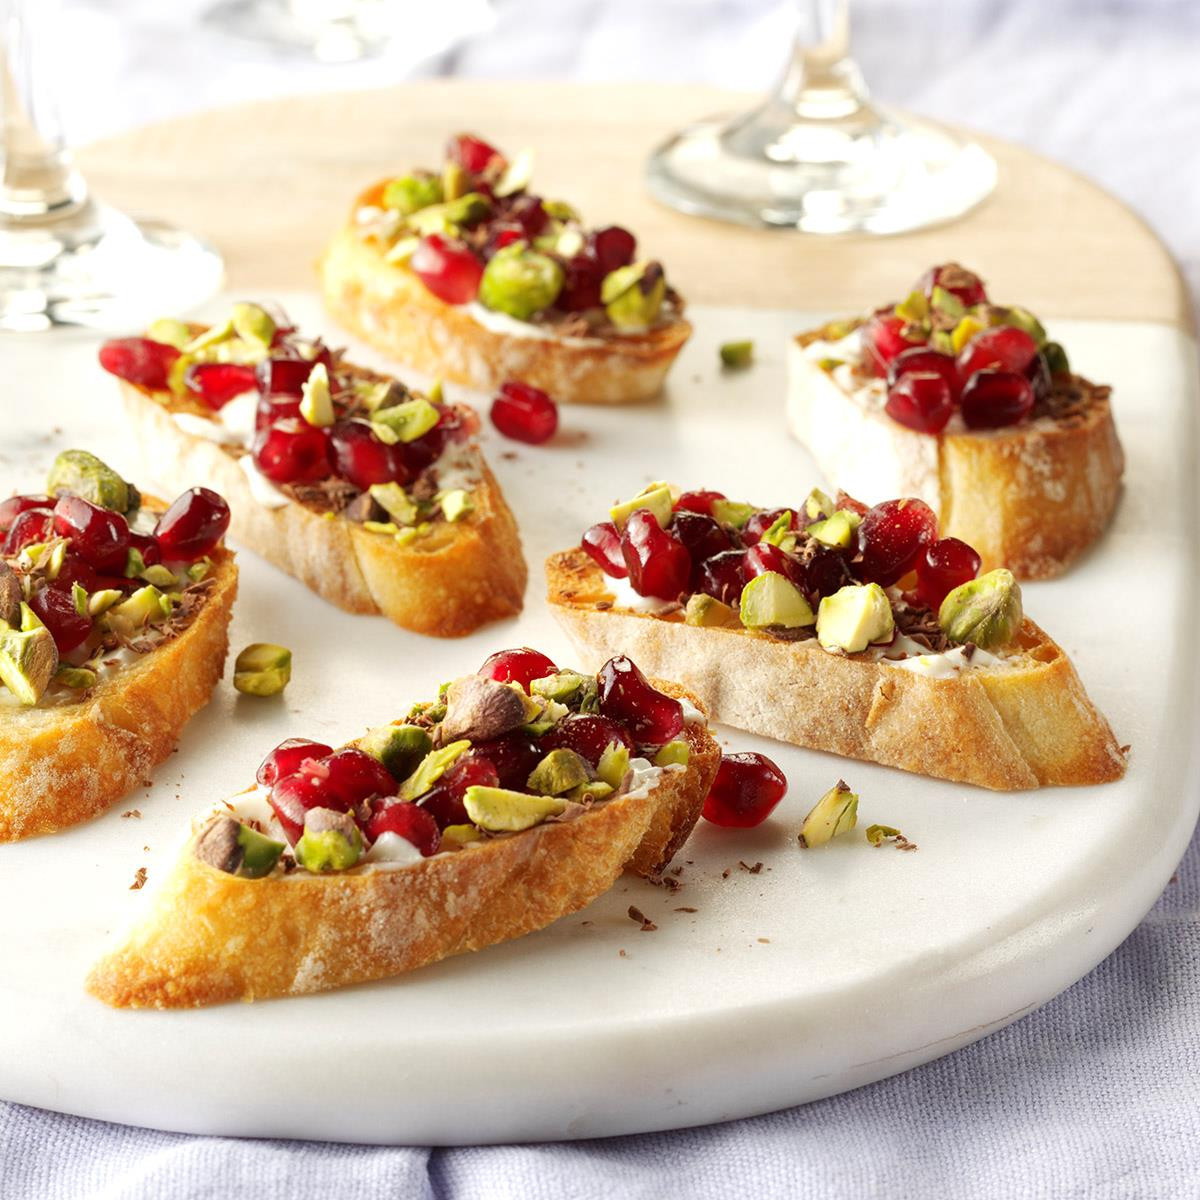 Horderves Ideas For Christmas Party
 40 Easy Christmas Appetizer Ideas Perfect for a Holiday